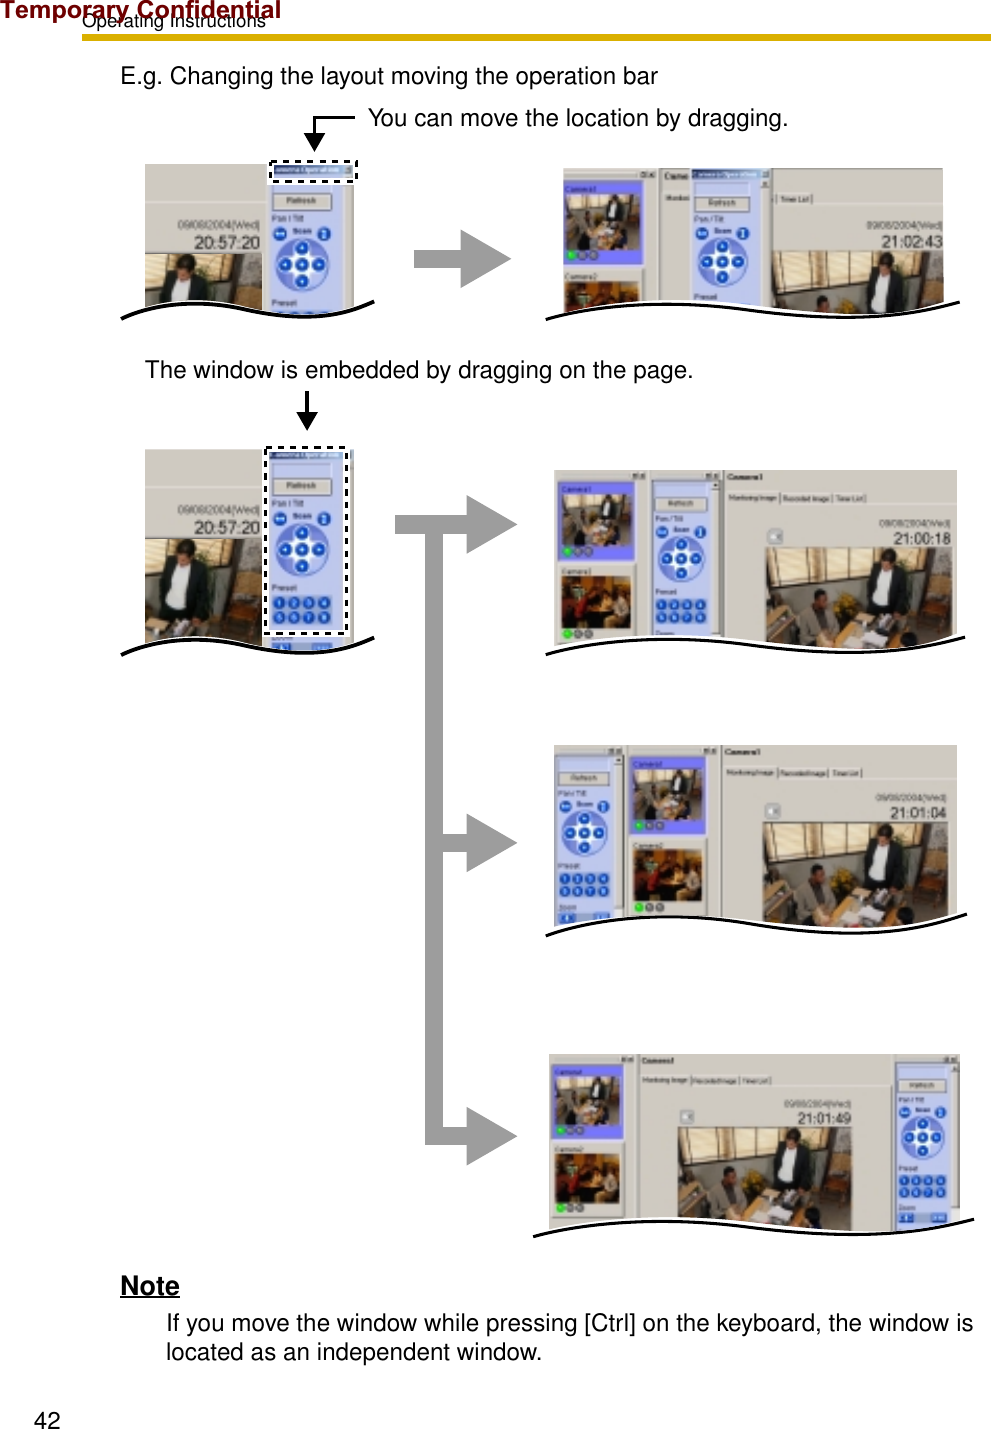 Operating Instructions42E.g. Changing the layout moving the operation barNoteIf you move the window while pressing [Ctrl] on the keyboard, the window is located as an independent window.You can move the location by dragging.The window is embedded by dragging on the page.Temporary Confidential